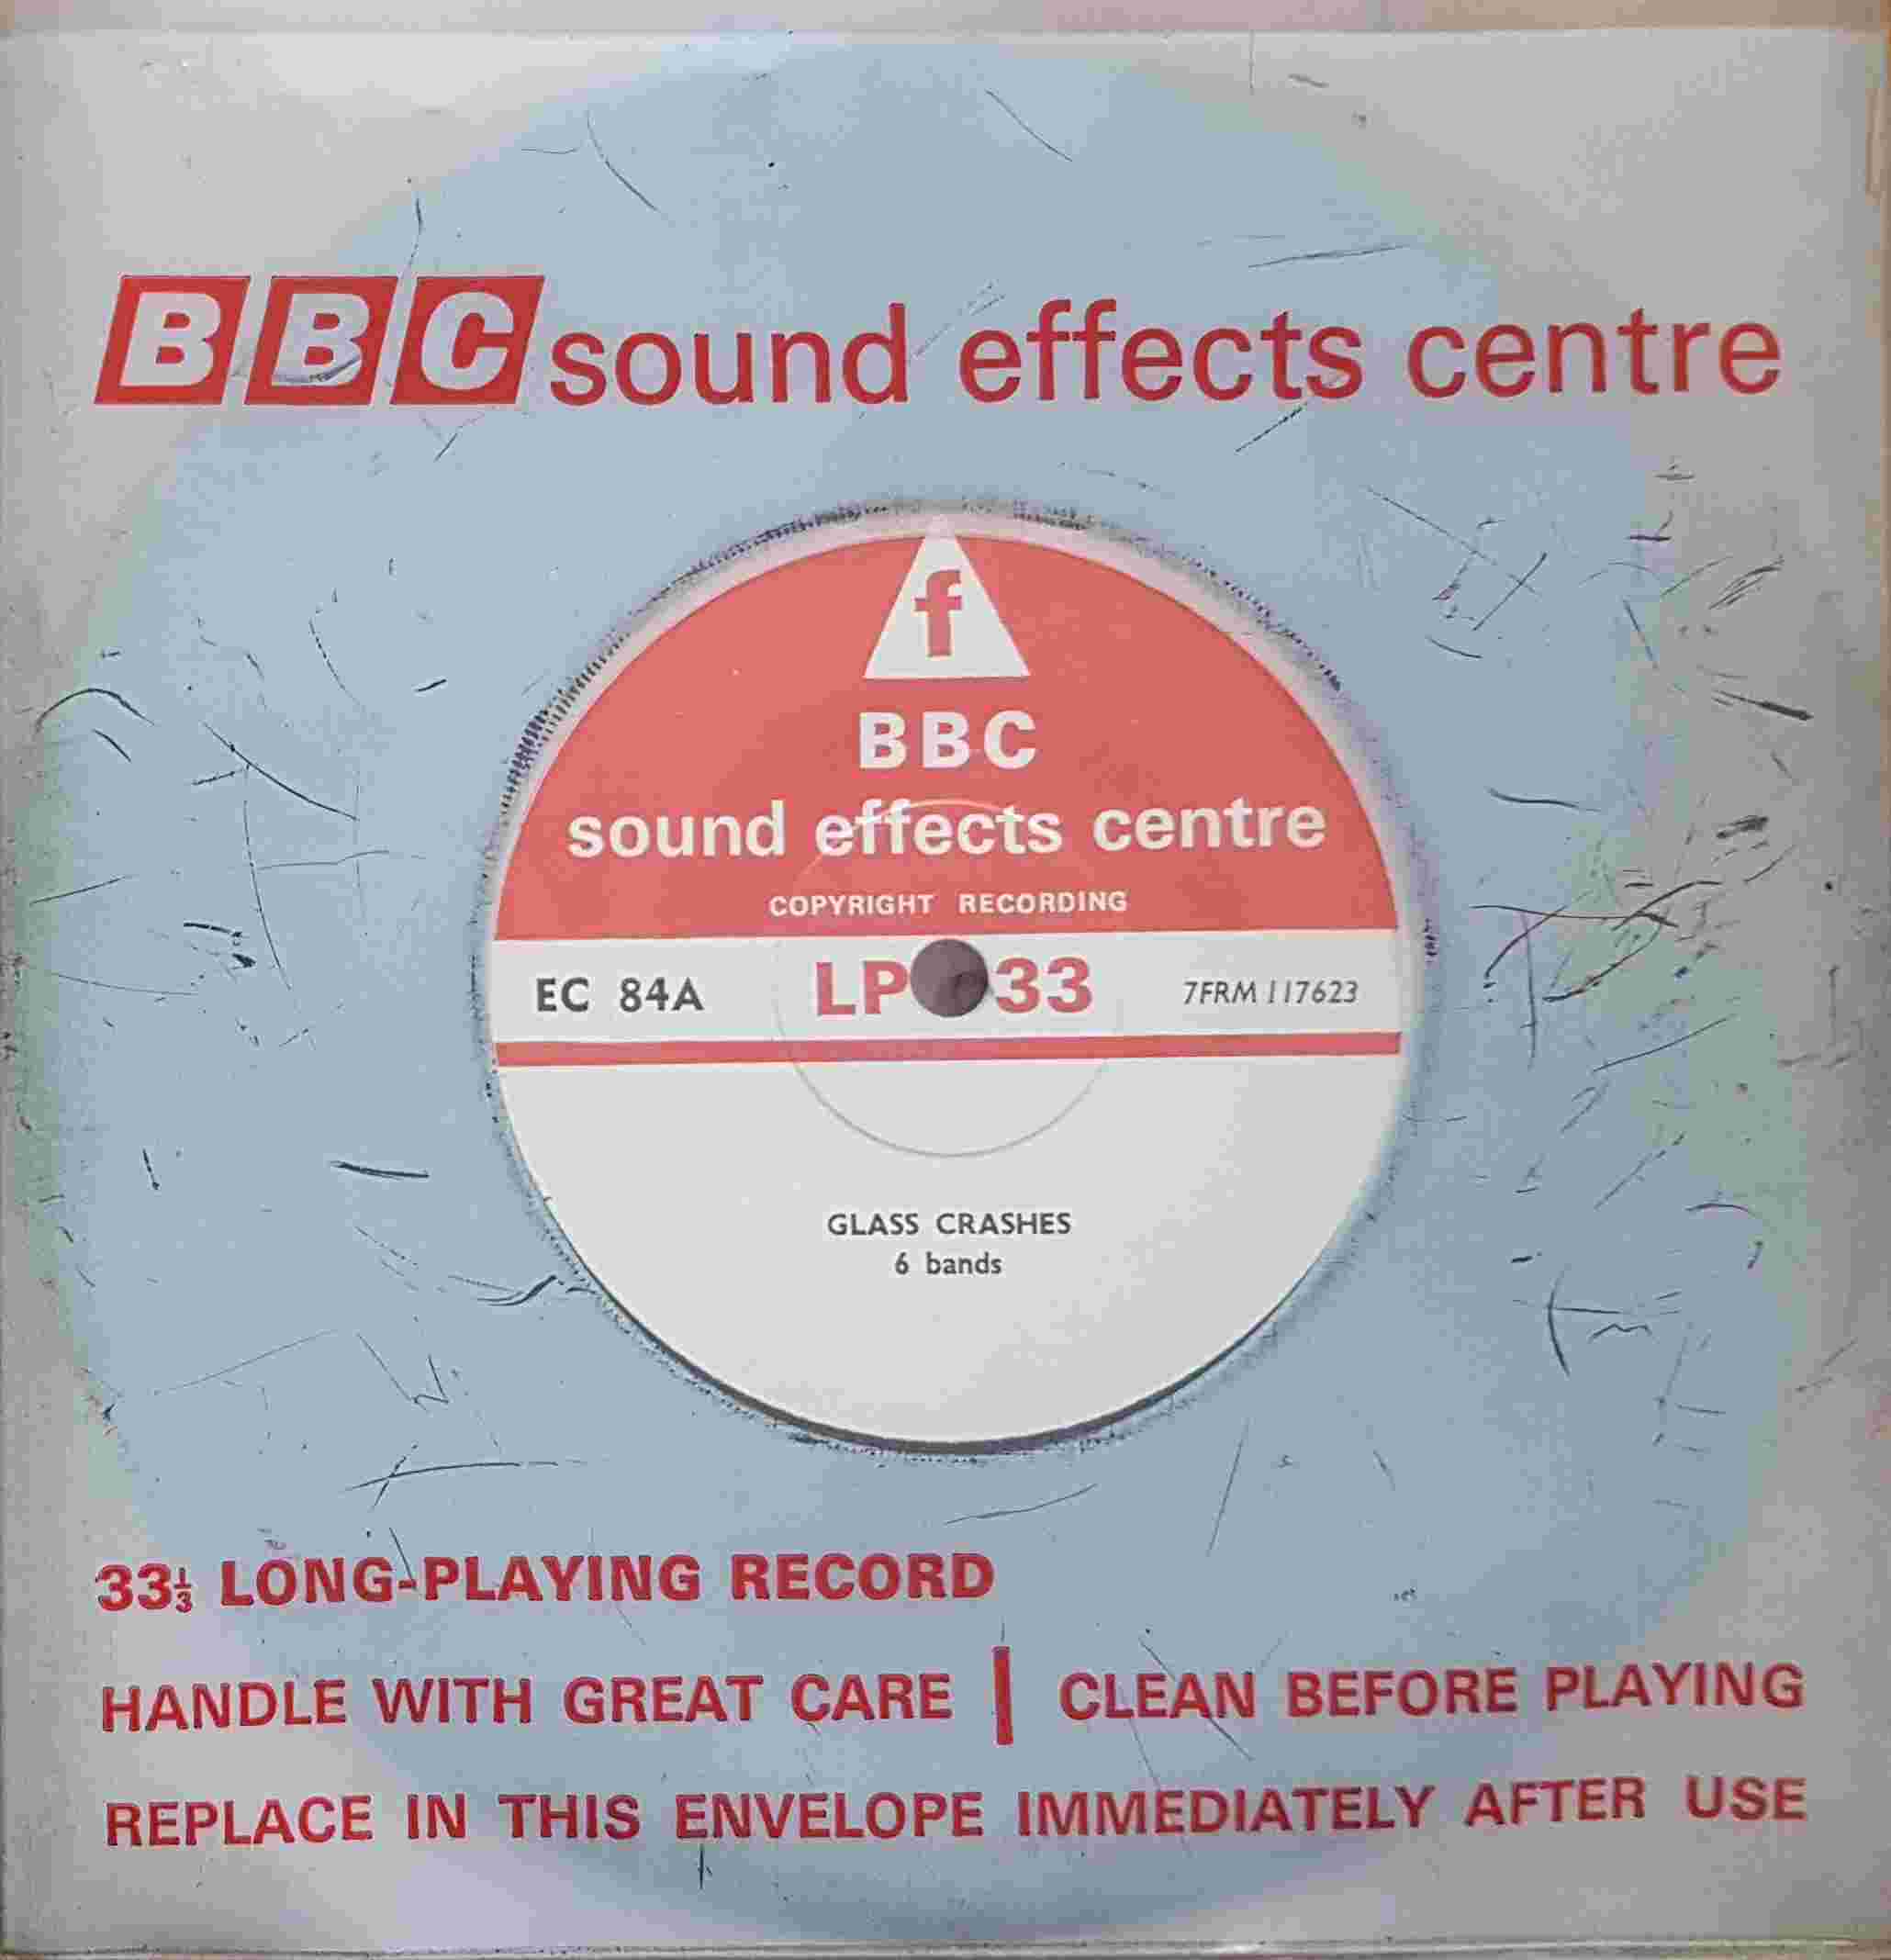 Picture of EC 84A Glass crashes single by artist Not registered from the BBC records and Tapes library